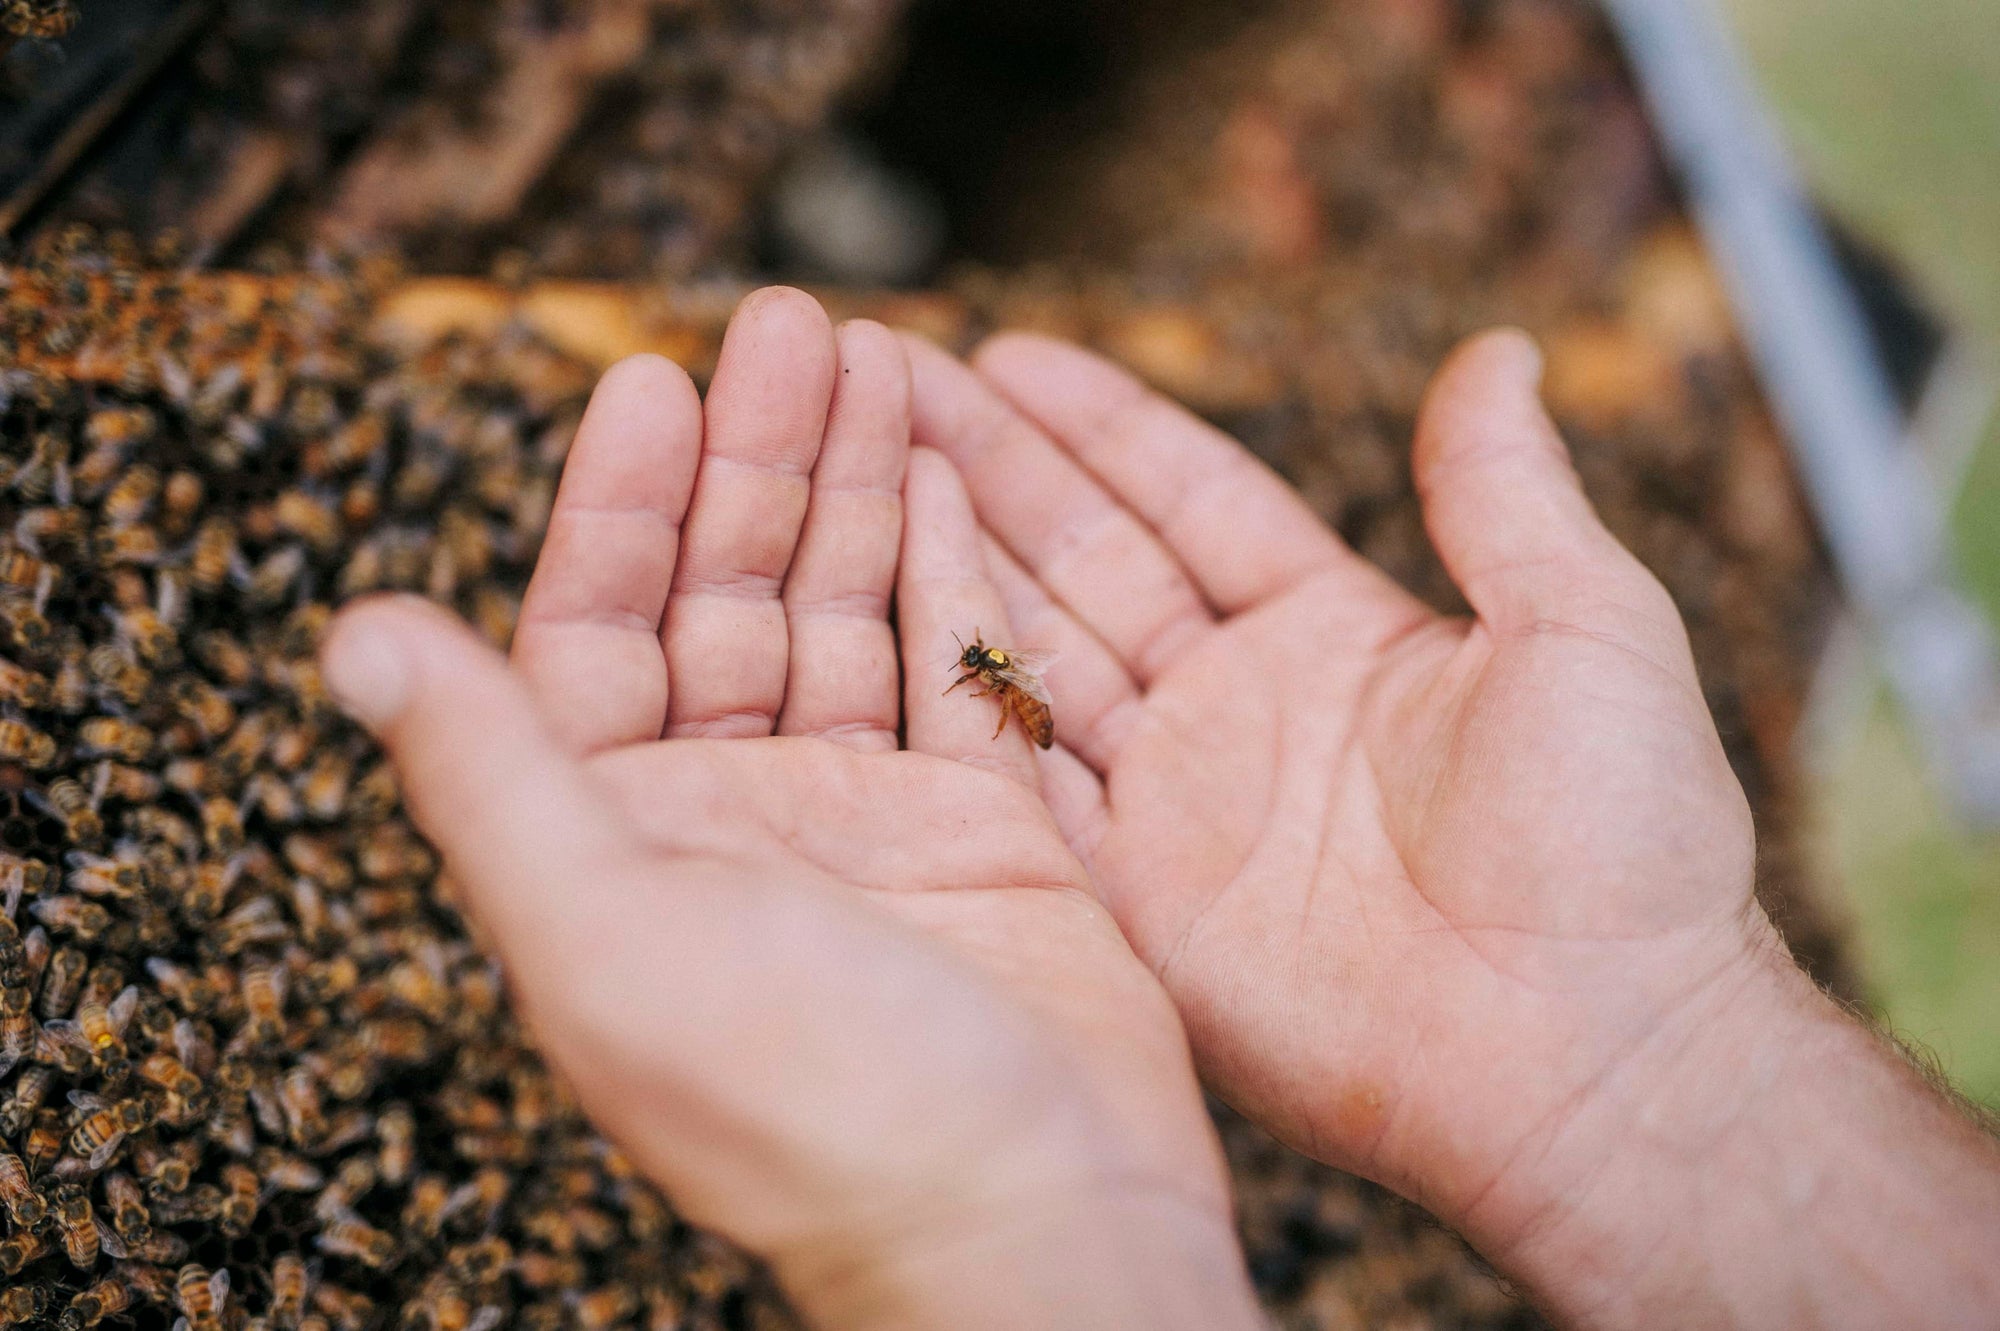 Pair of hands holding a bee